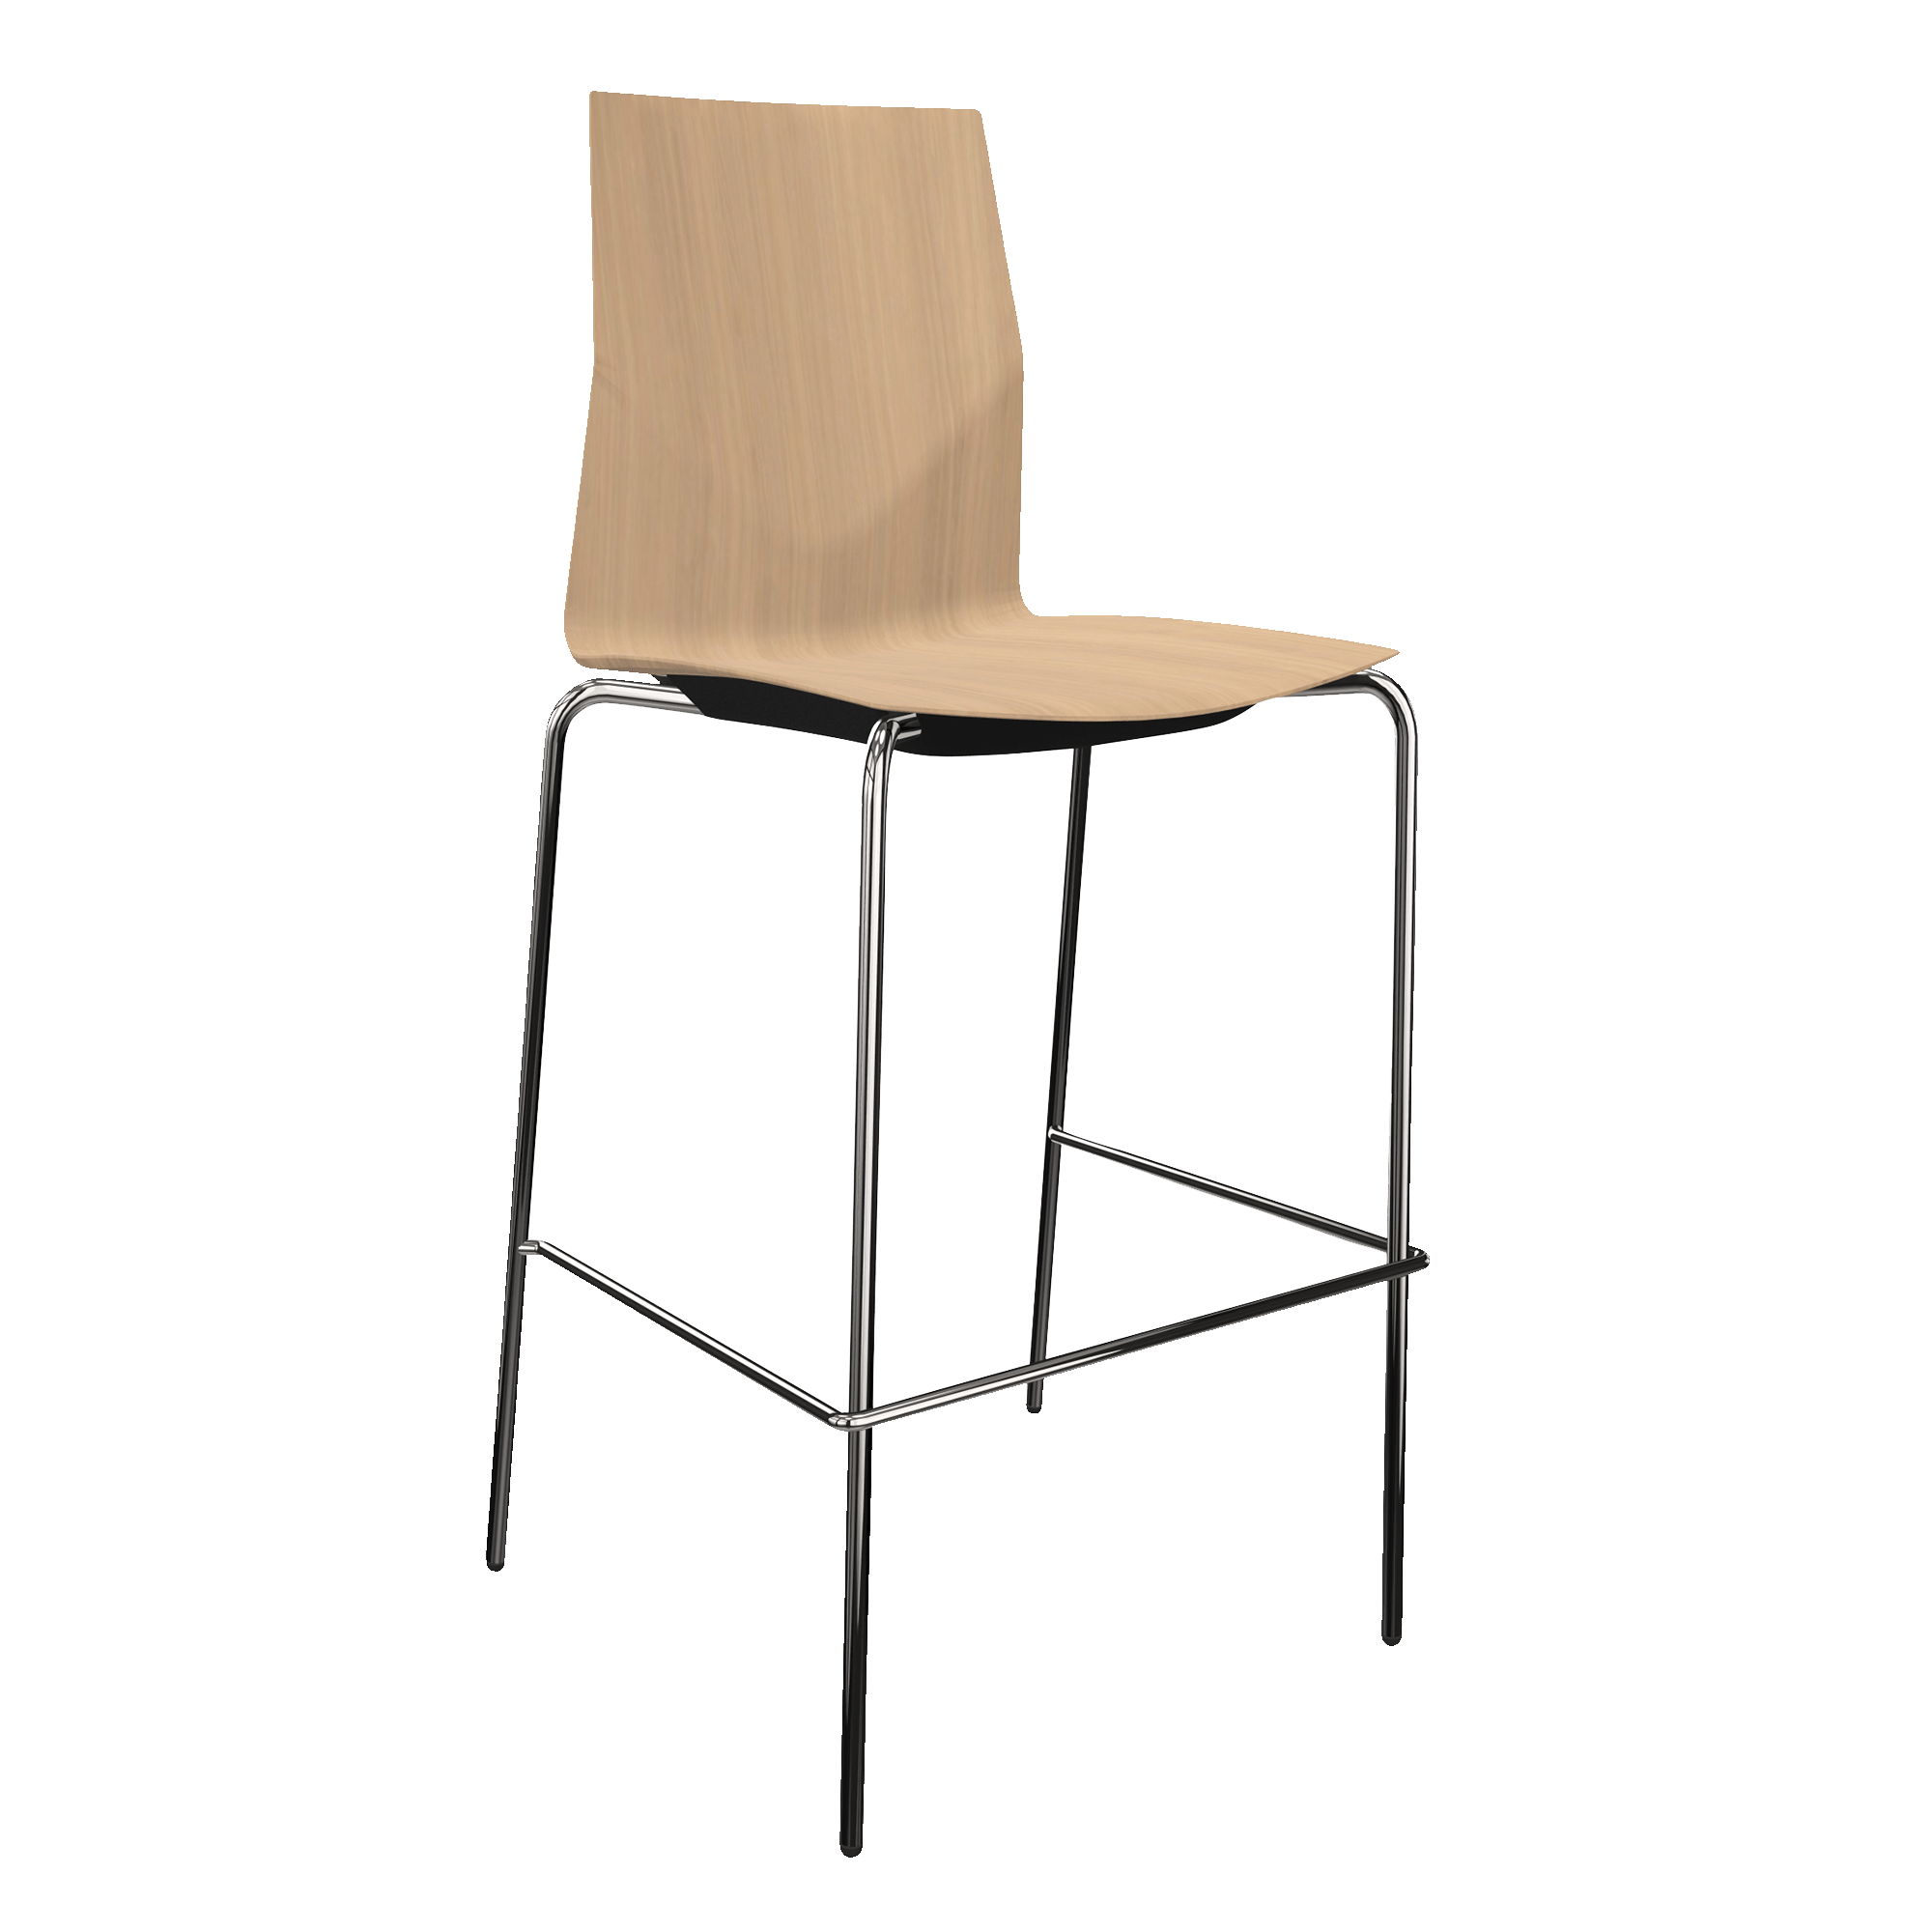 Counter chair with wooden seat with chrome legs